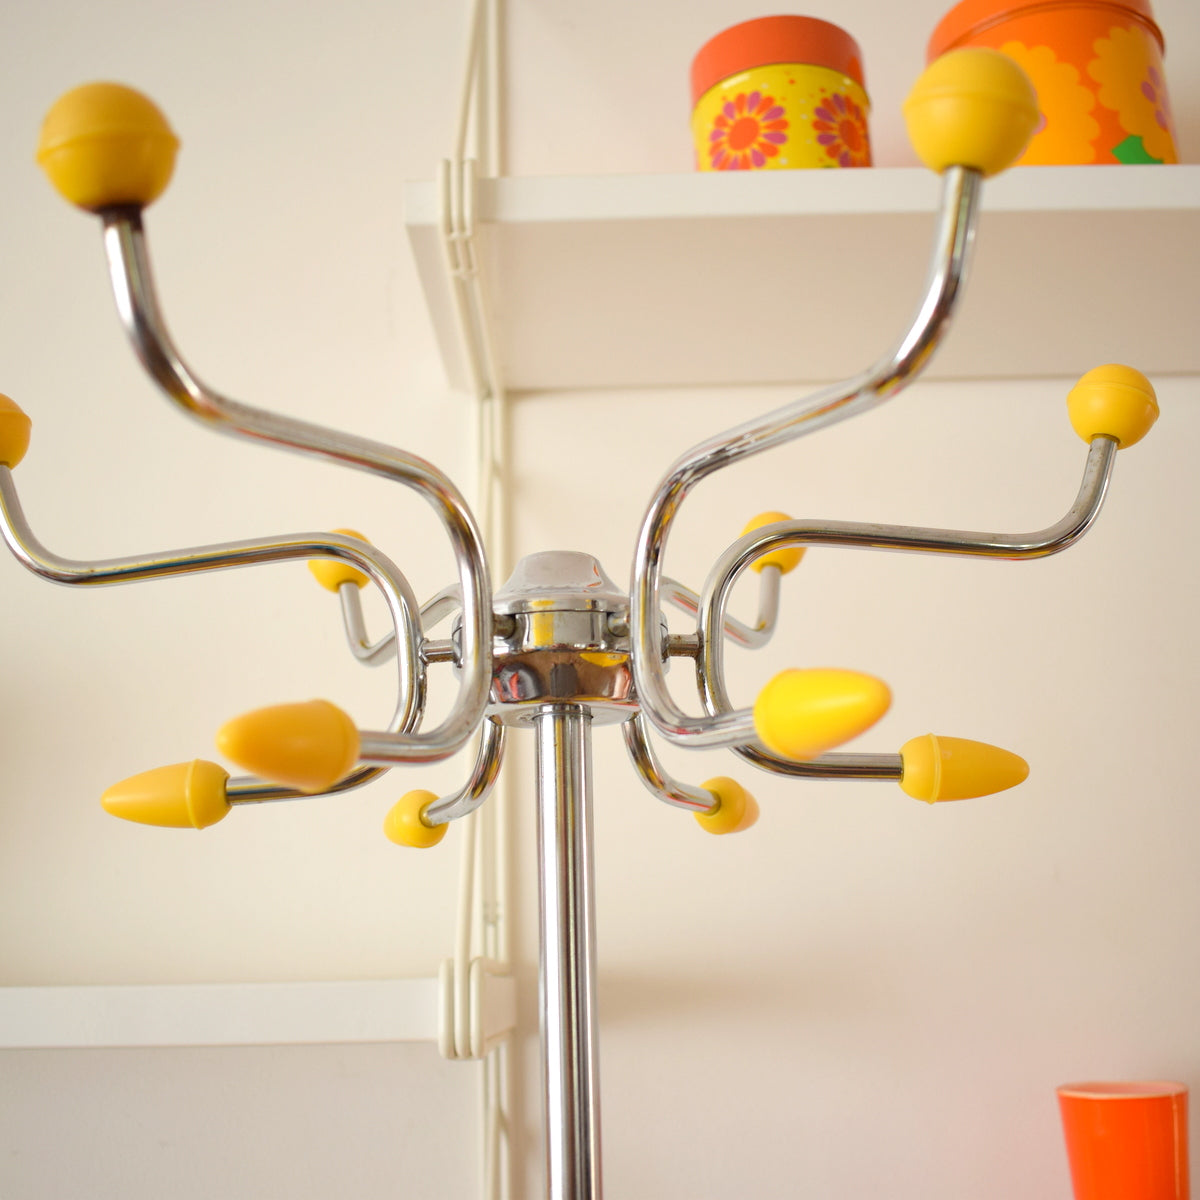 Vintage 1950s Atomic Ball Hat / Coat Stand - Yellow & Chrome